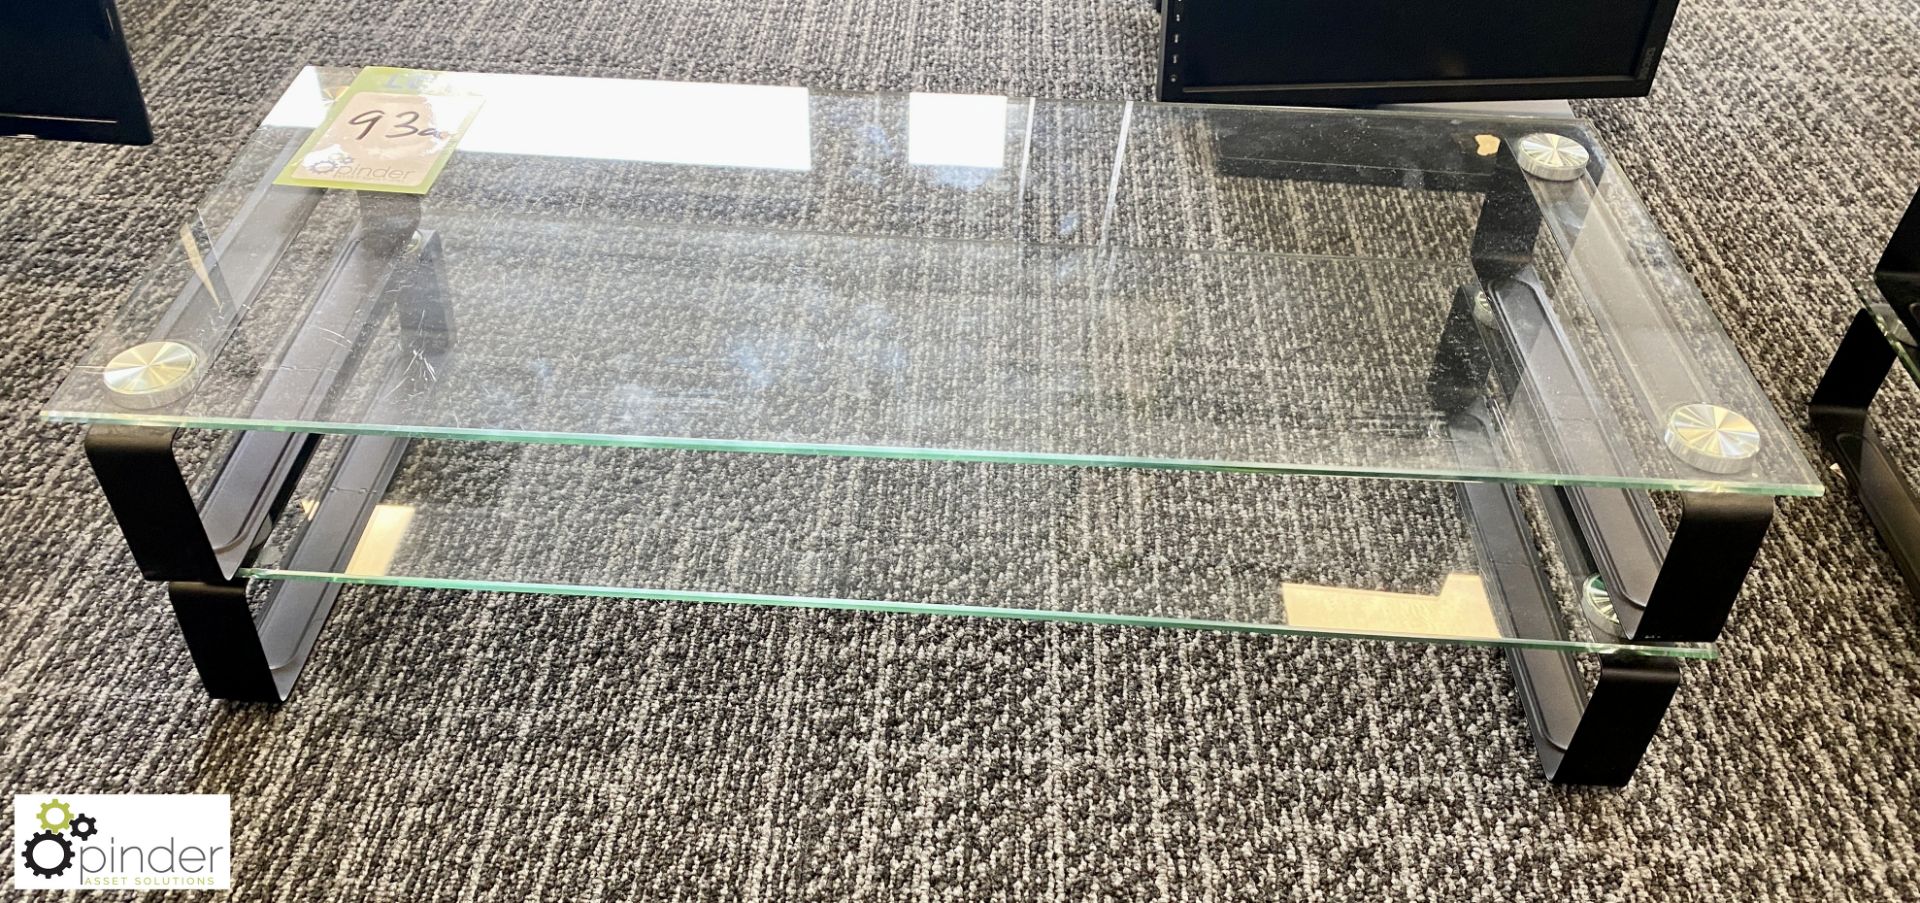 4 glass Monitor Stands (ground floor main office) - Image 2 of 3